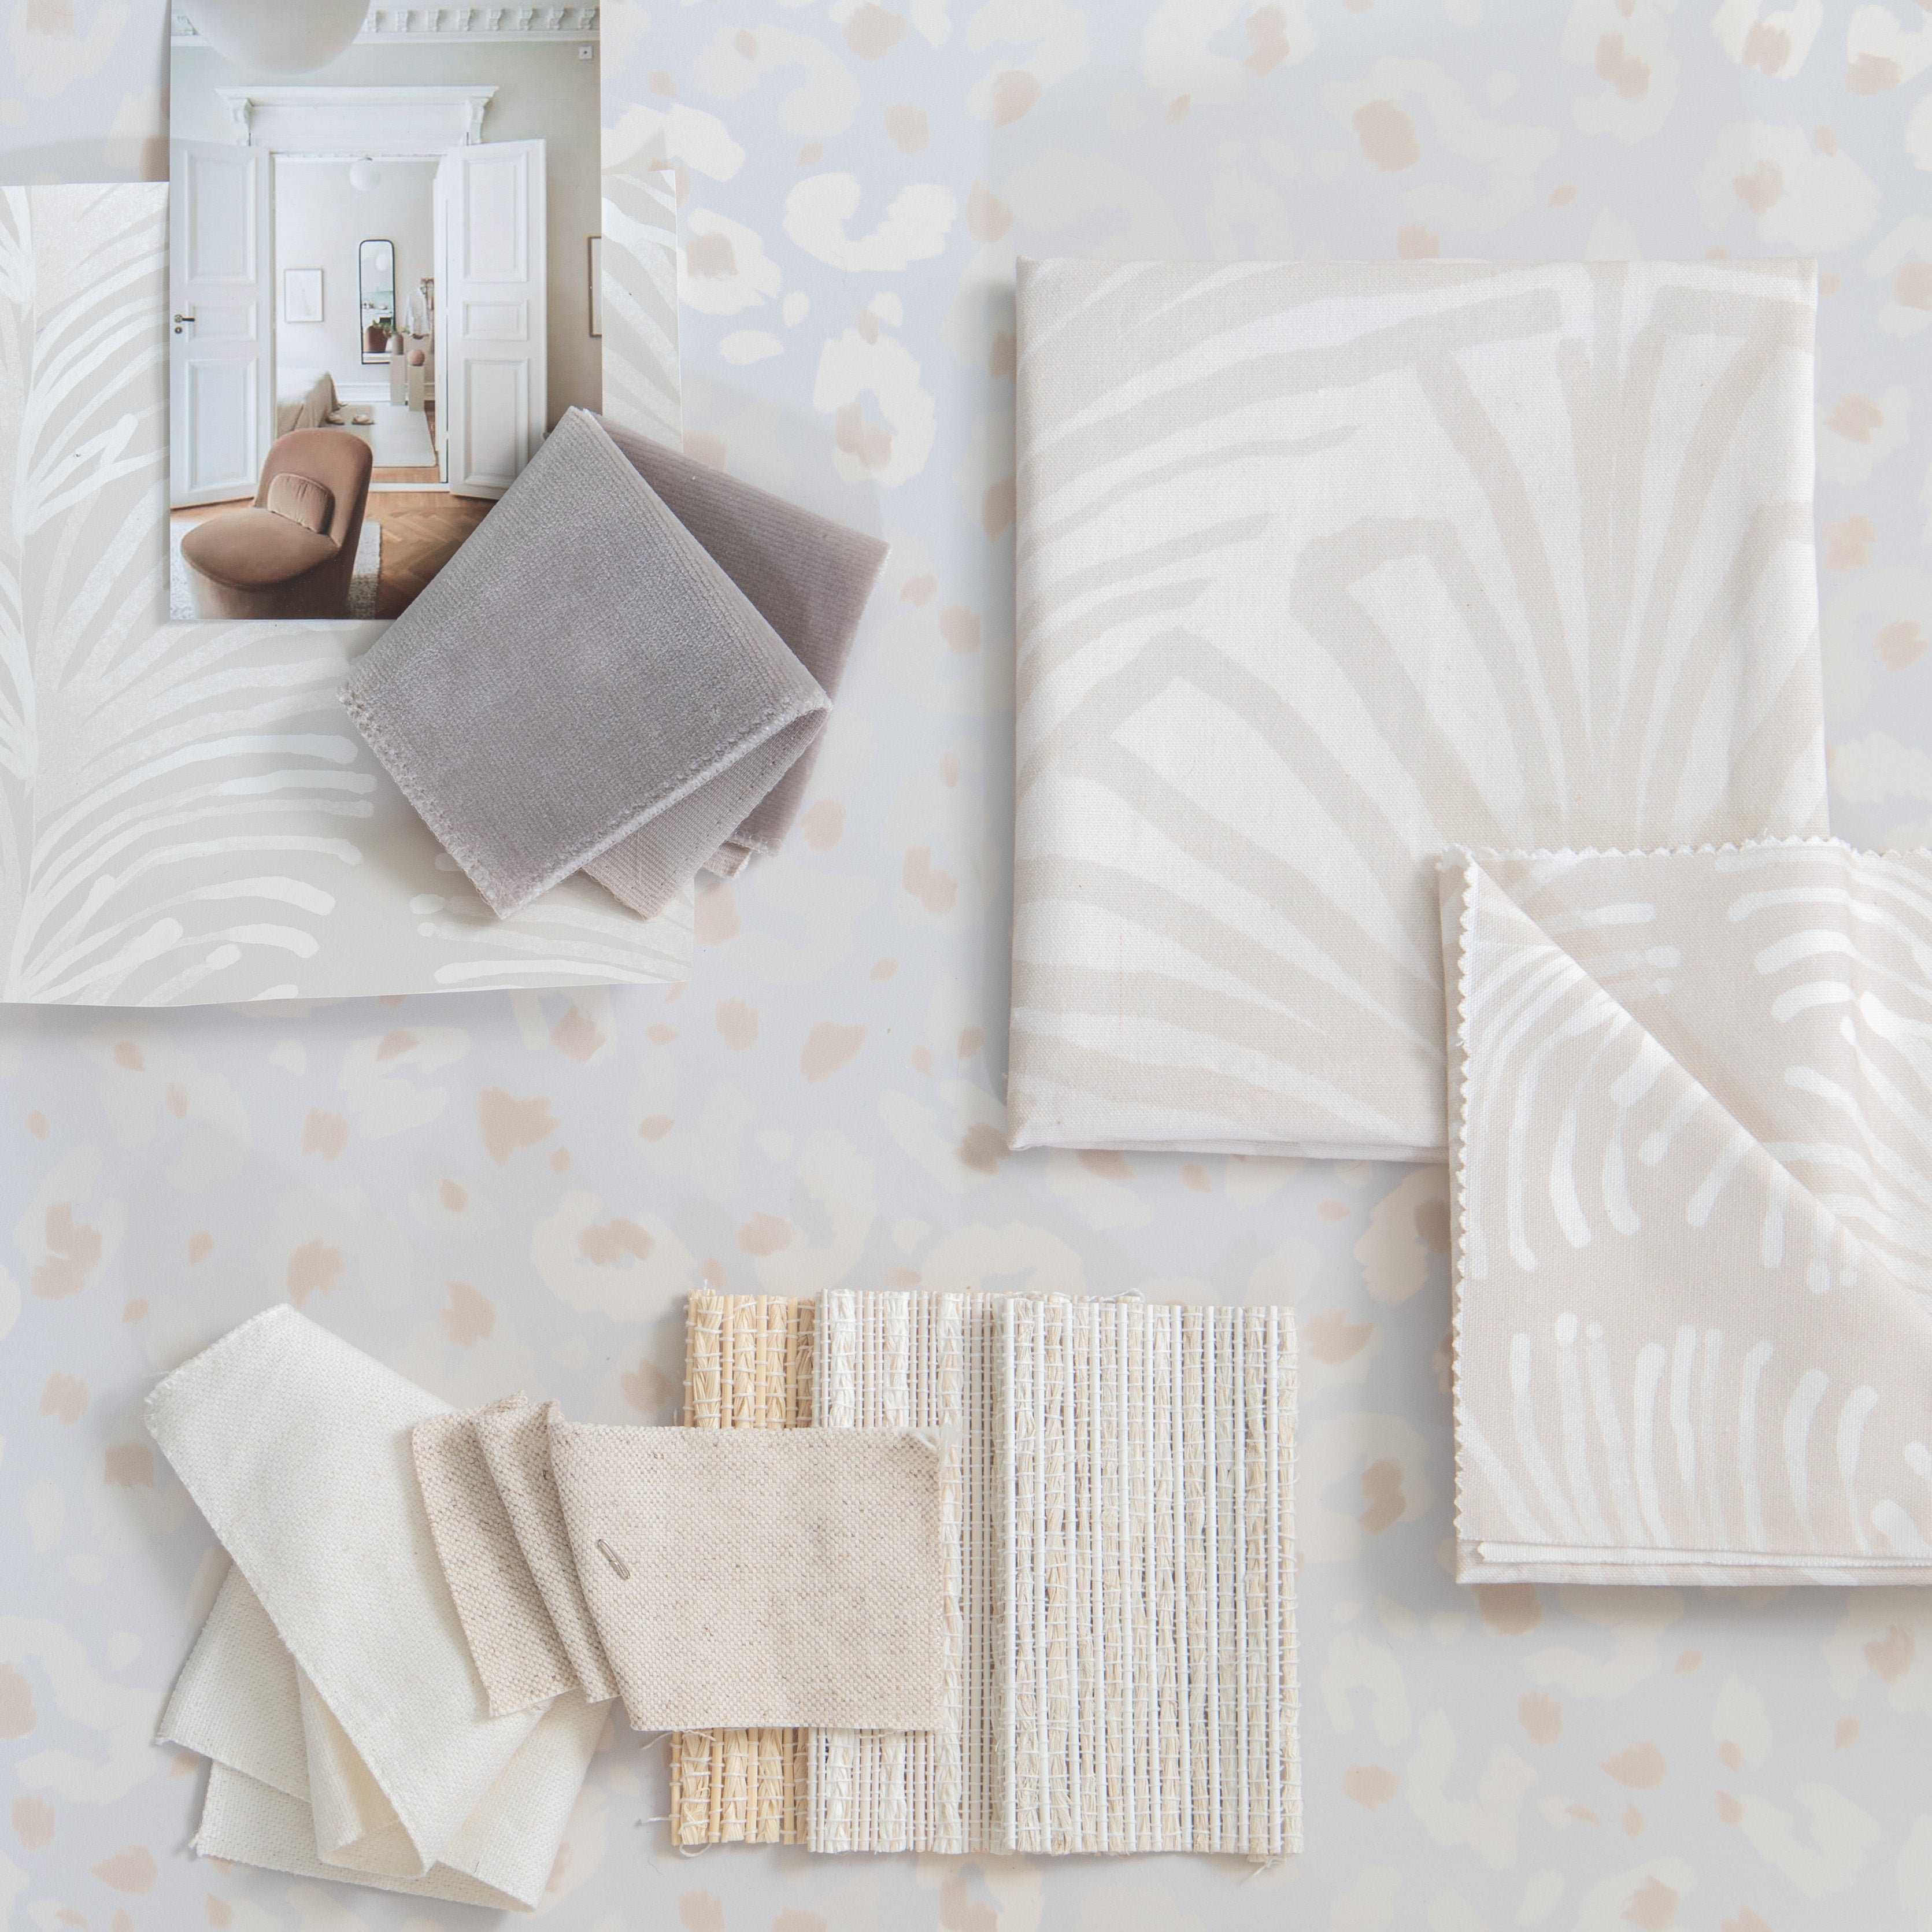 Interior design moodboard and fabric inspirations with Beige Botanical Stripe Printed Swatch, Grey Velvet Swatch and beige palm printed swatch